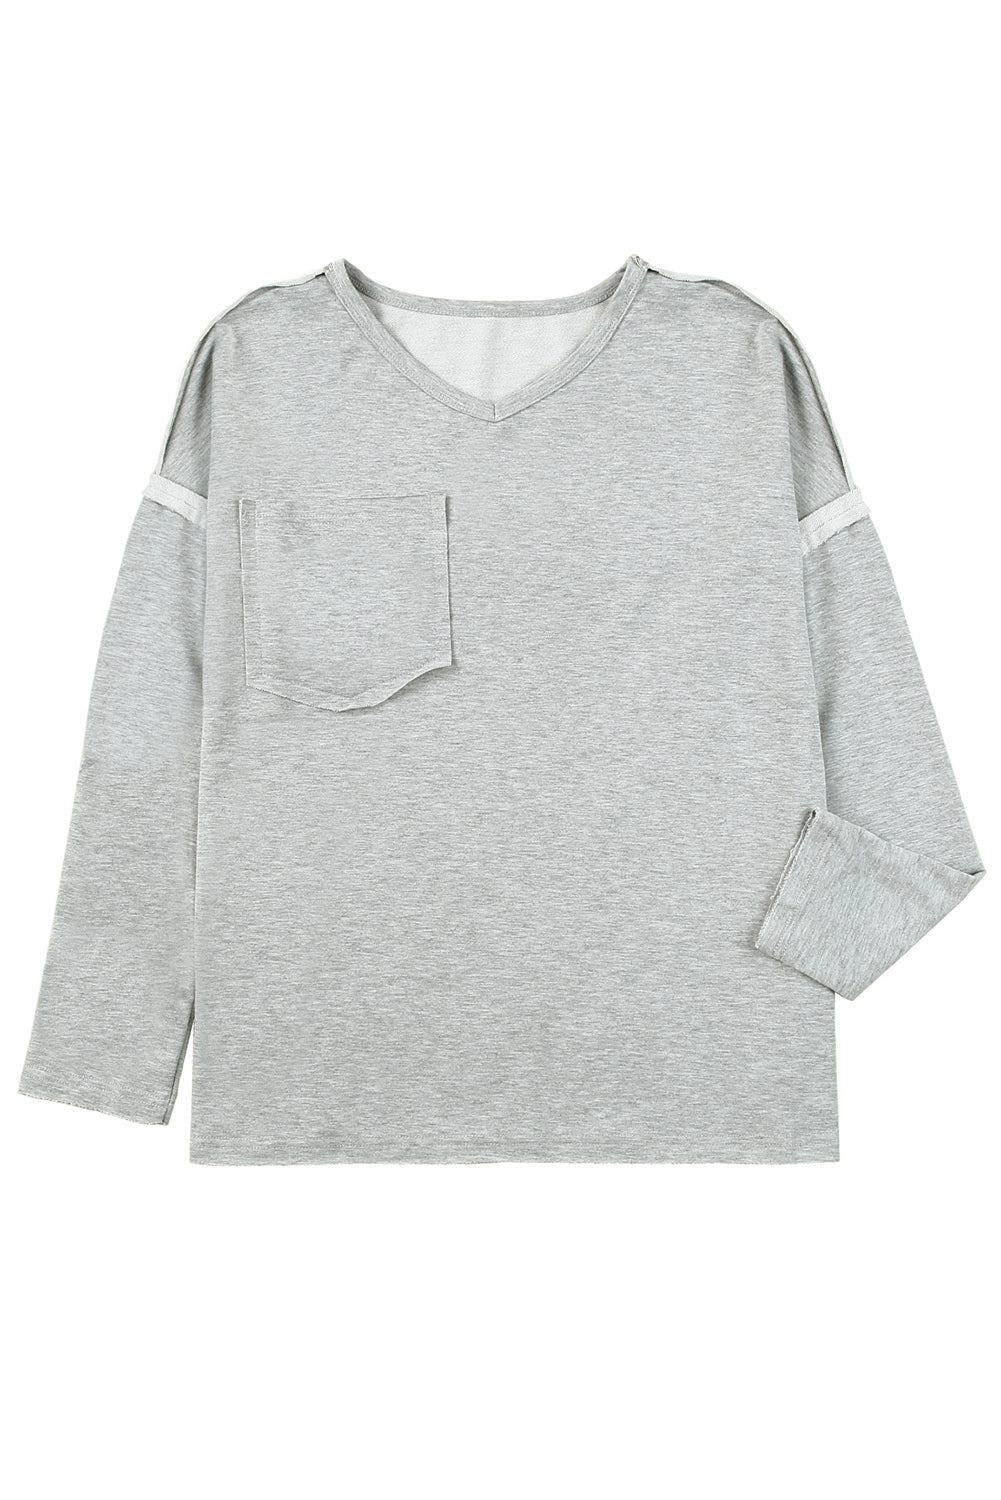 Pocketed Oversized Drop Sleeve Top